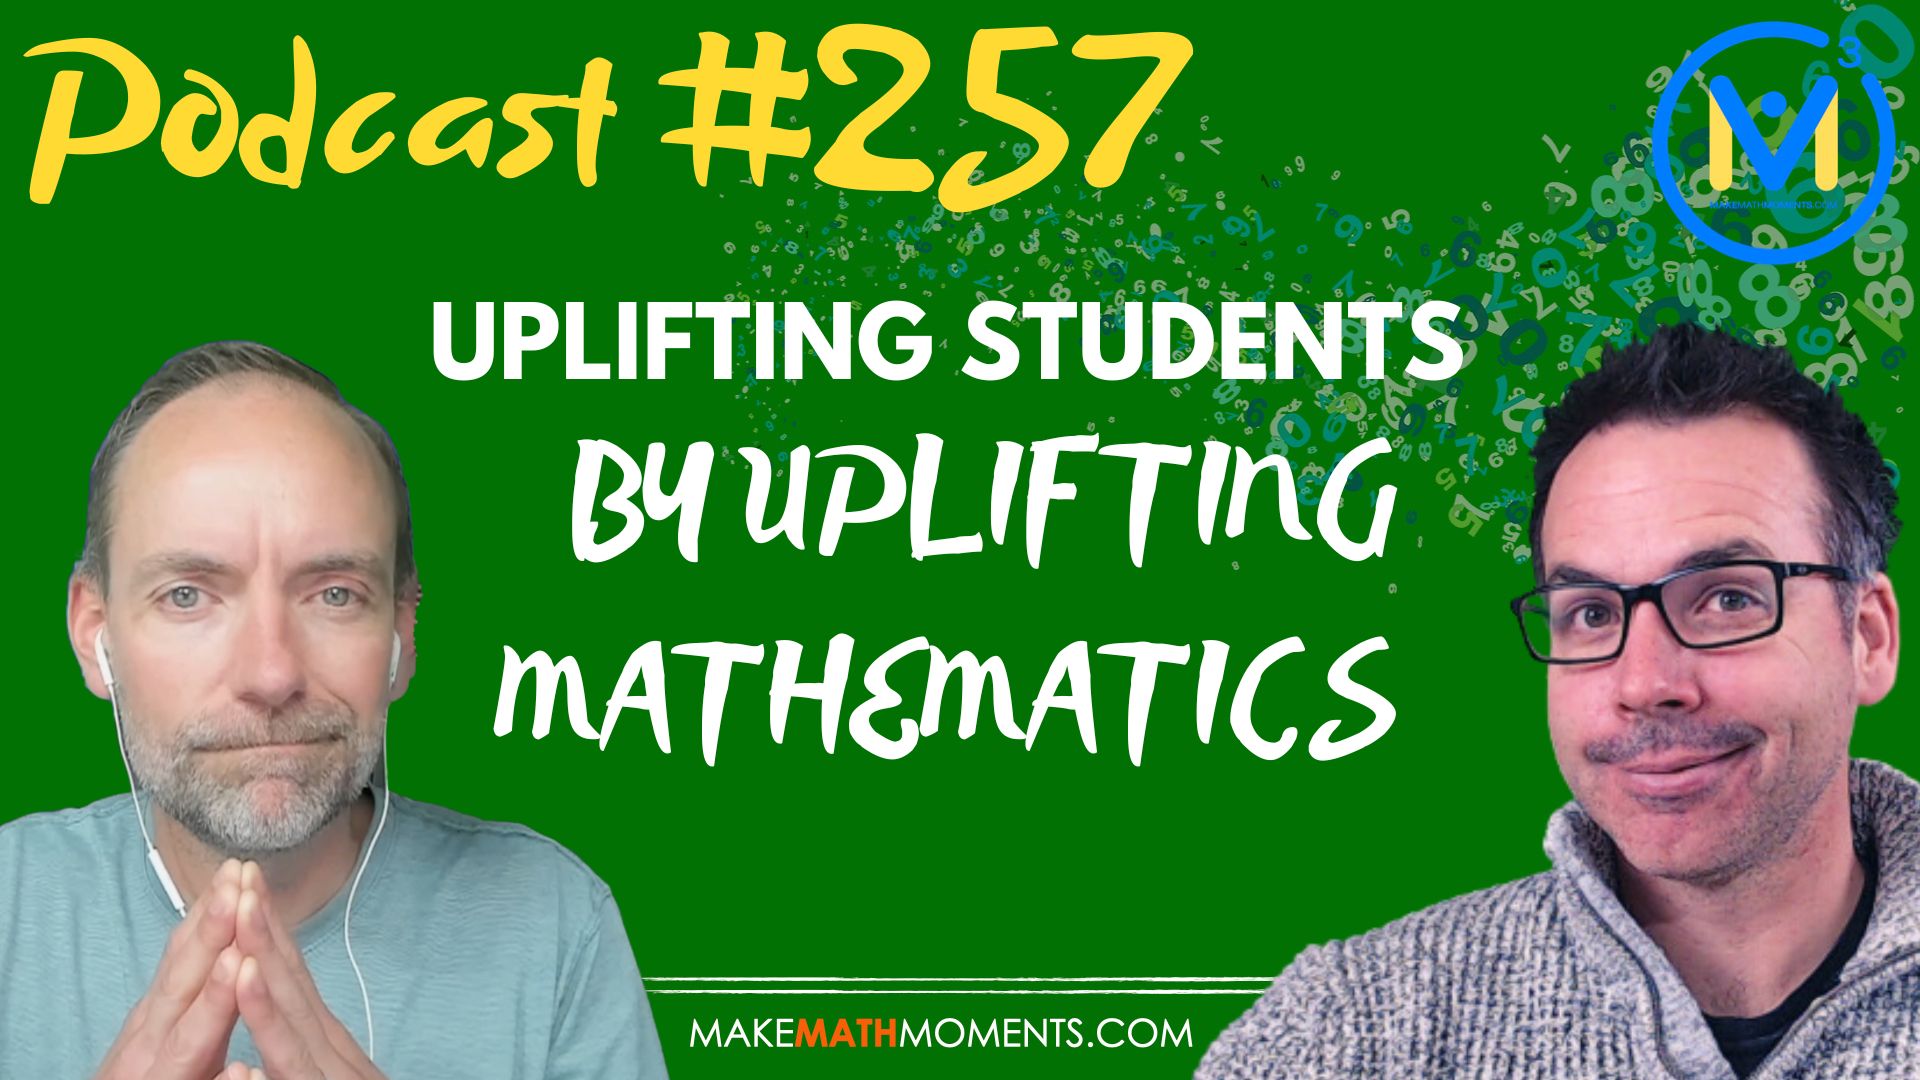 Episode #257: Uplifting Students by Uplifting Mathematics: A Conversation with Sunil Singh